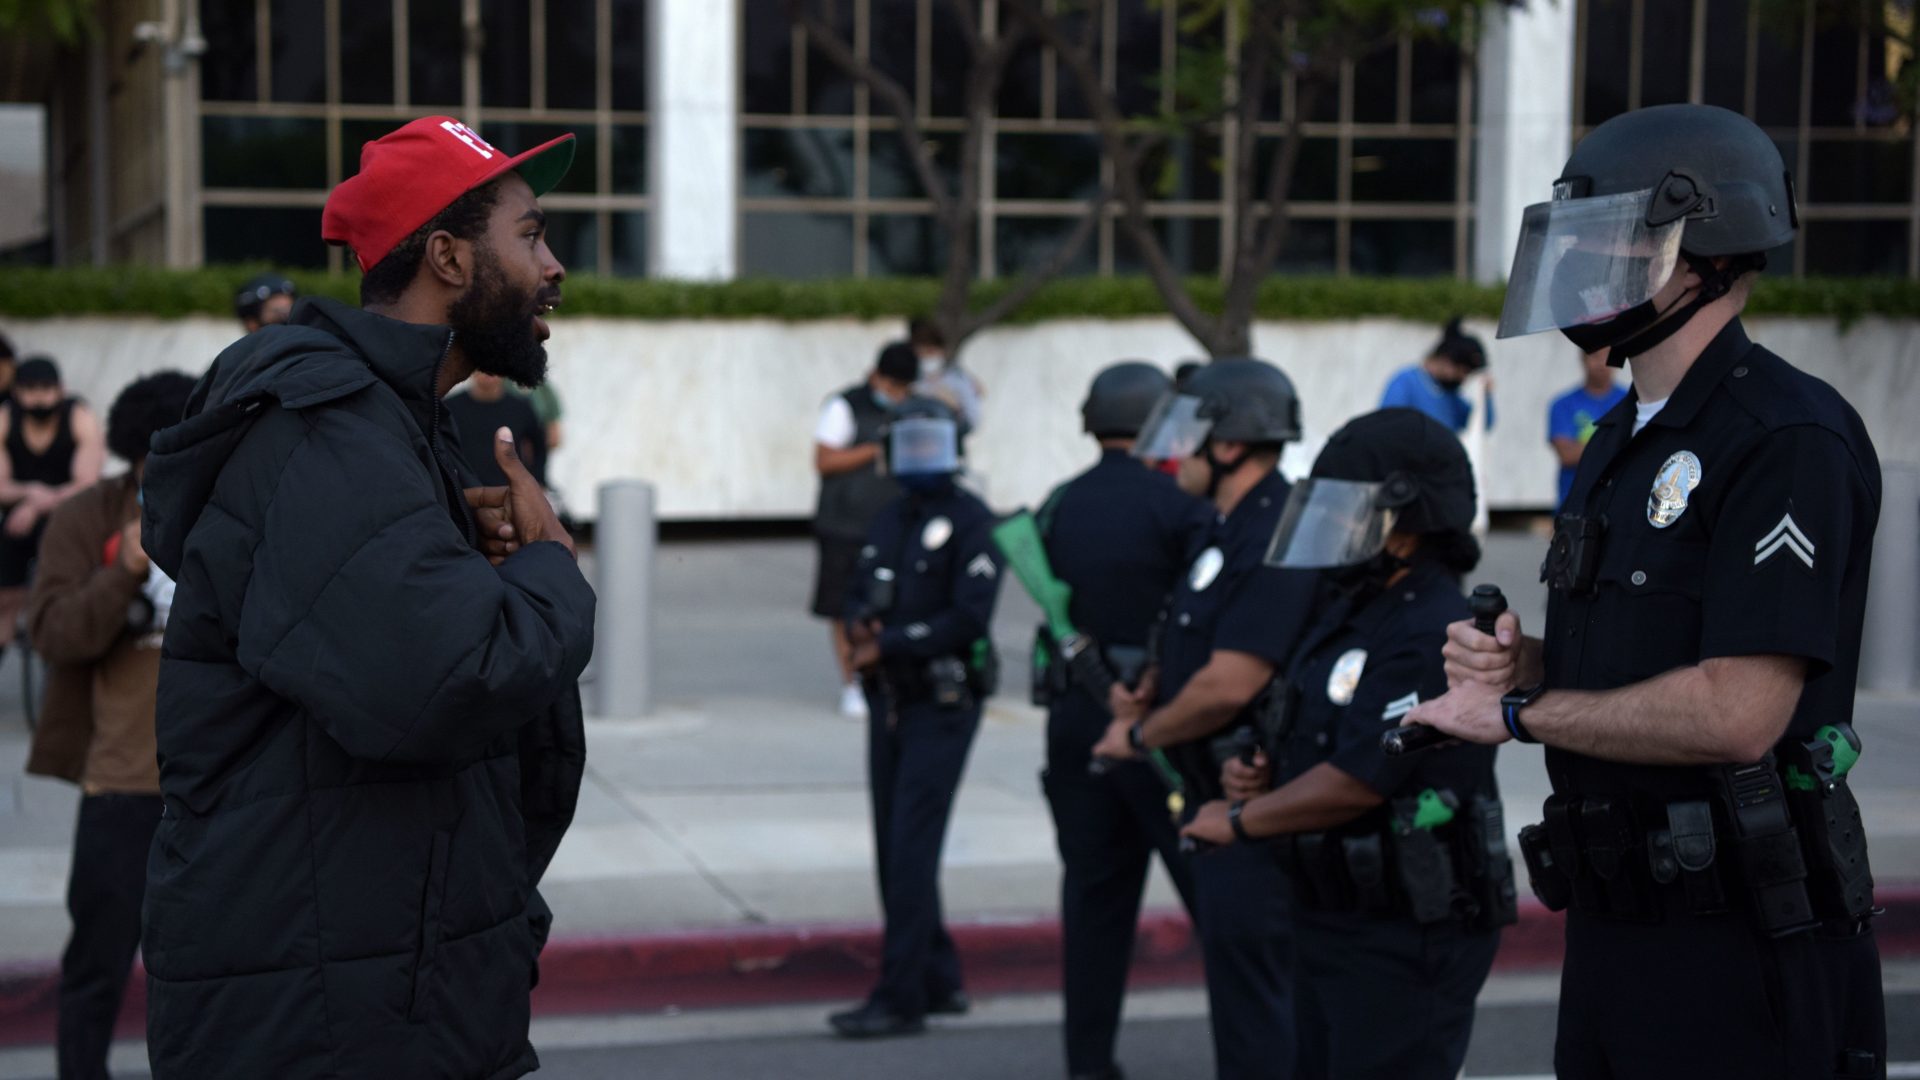 A demonstrator explains himself to an officer in riot gear during a protest Wednesday in downtown Los Angeles. The impact of George Floyd's death has been felt well beyond Minneapolis' city limits.